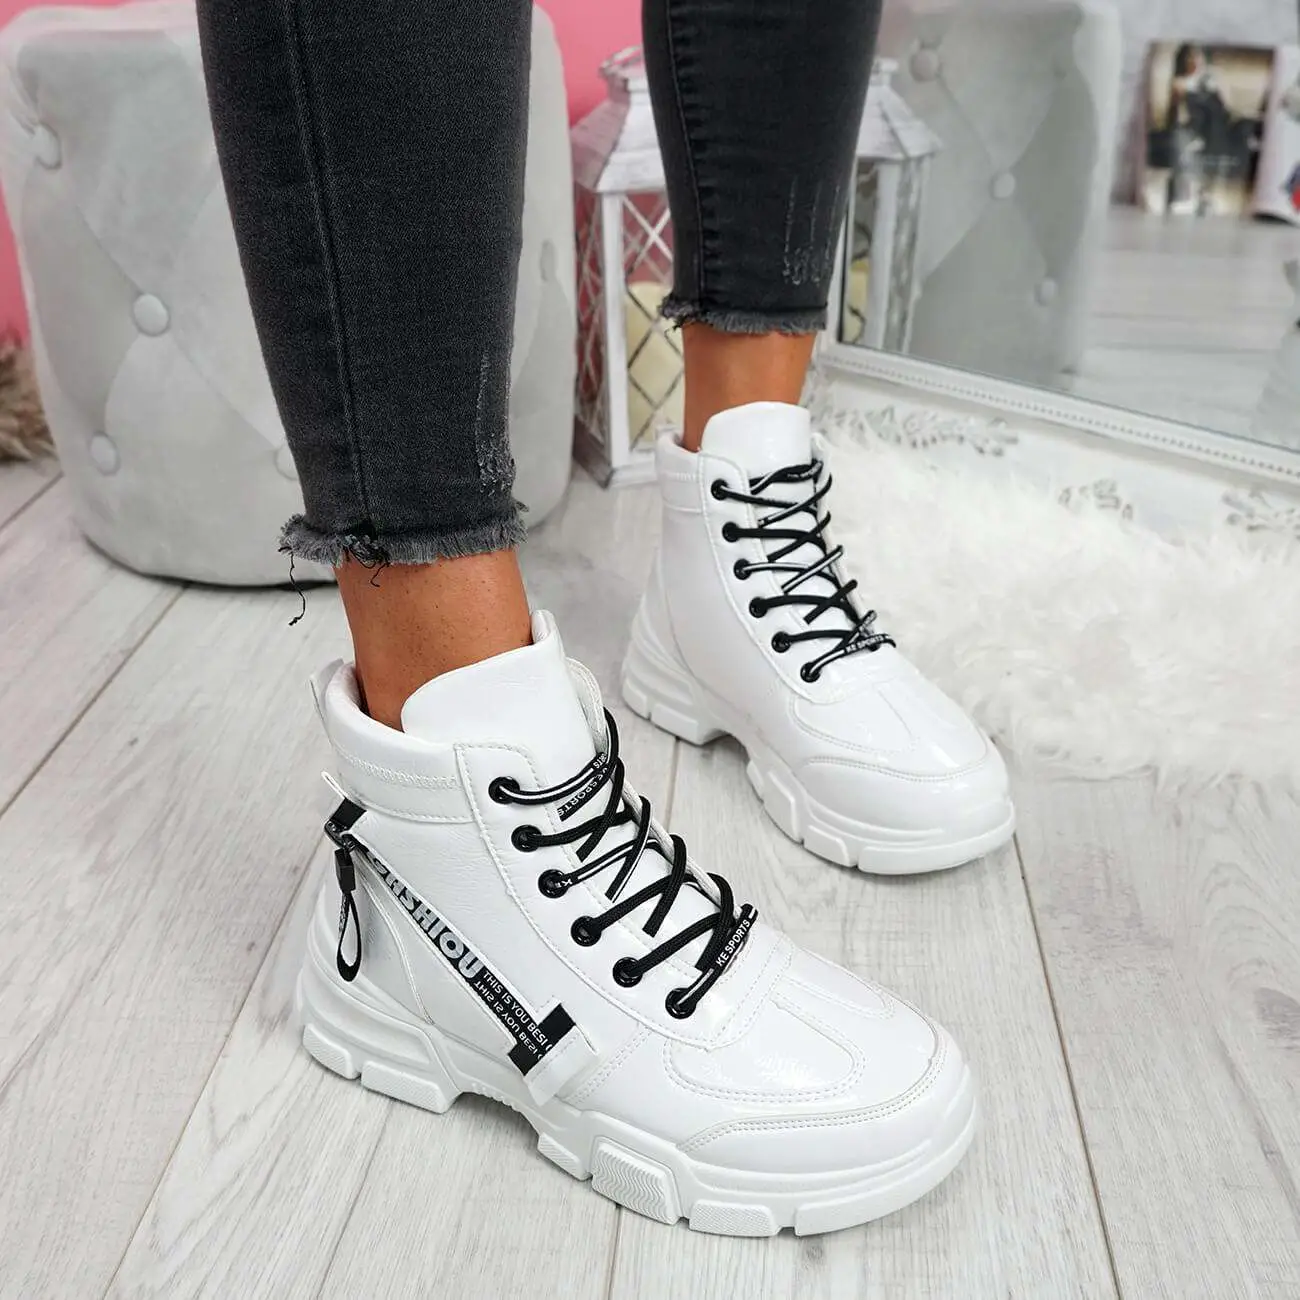 WOMENS LADIES HIGH TOP LACE UP TRAINERS CHUNKY SOLE SNEAKERS PARTY ...